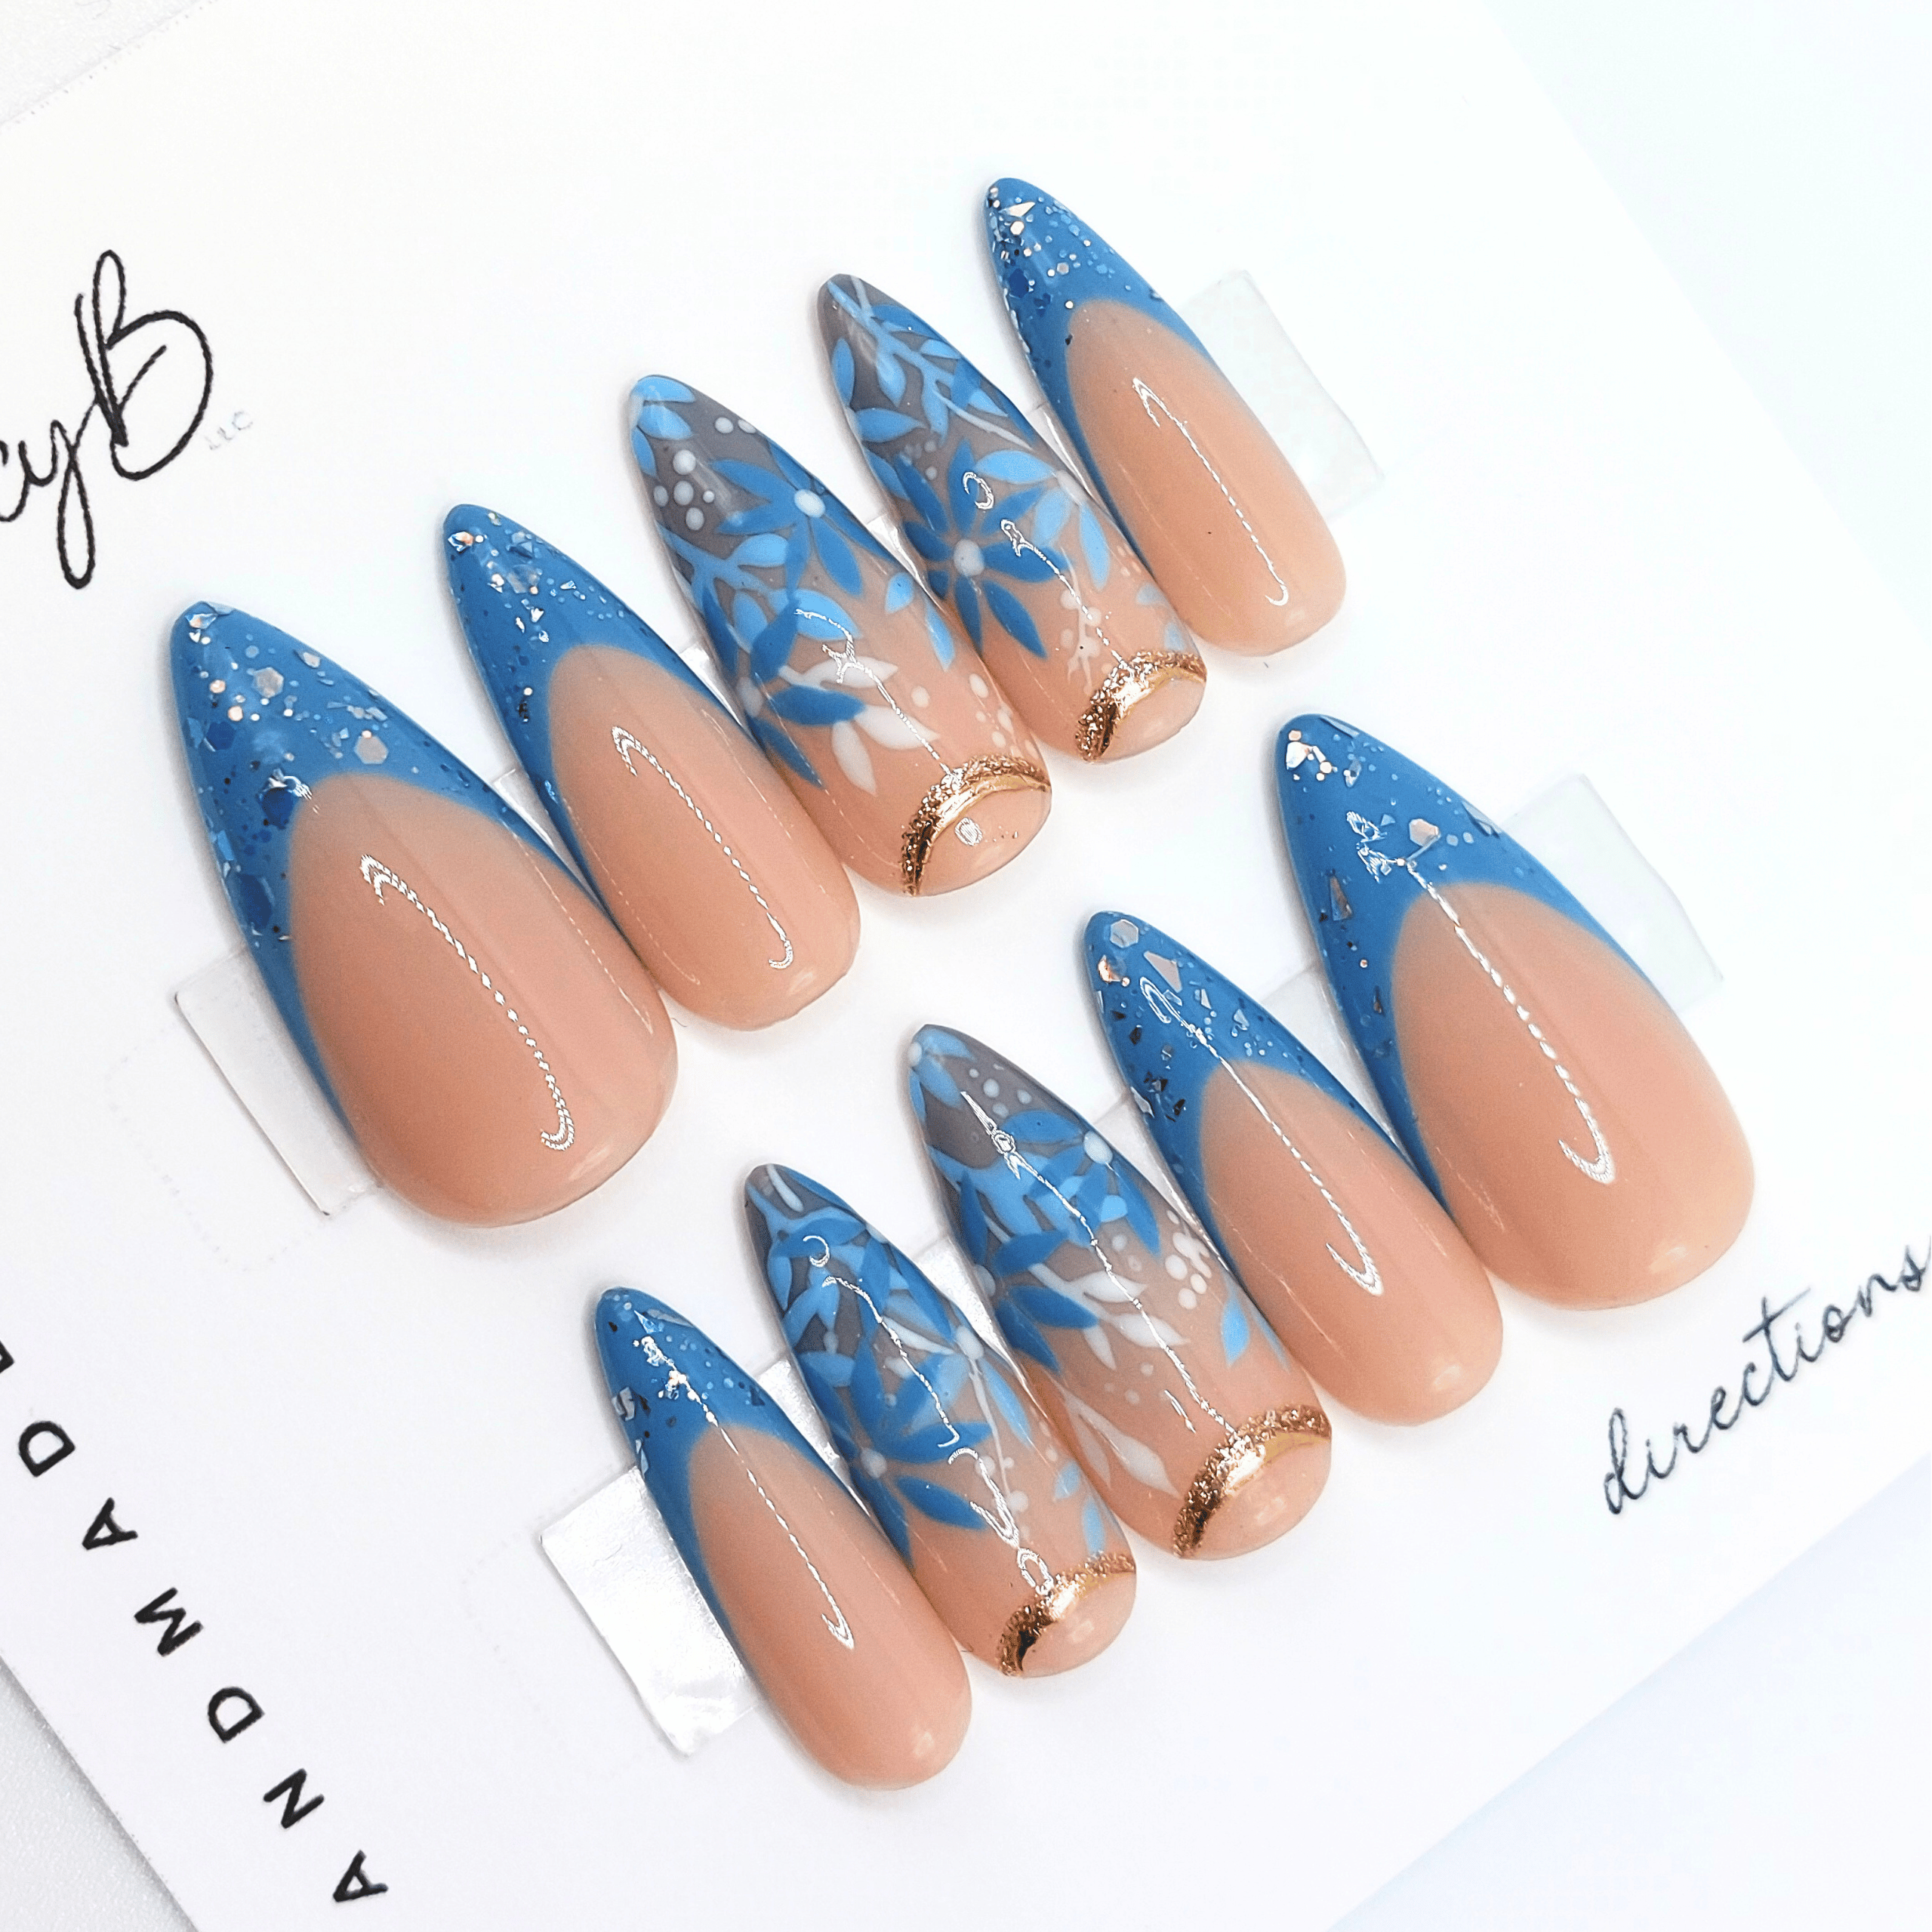 custom flower press on nails, hand painted floral designs in different shades of blue, in medium stiletto shape with nude base color.